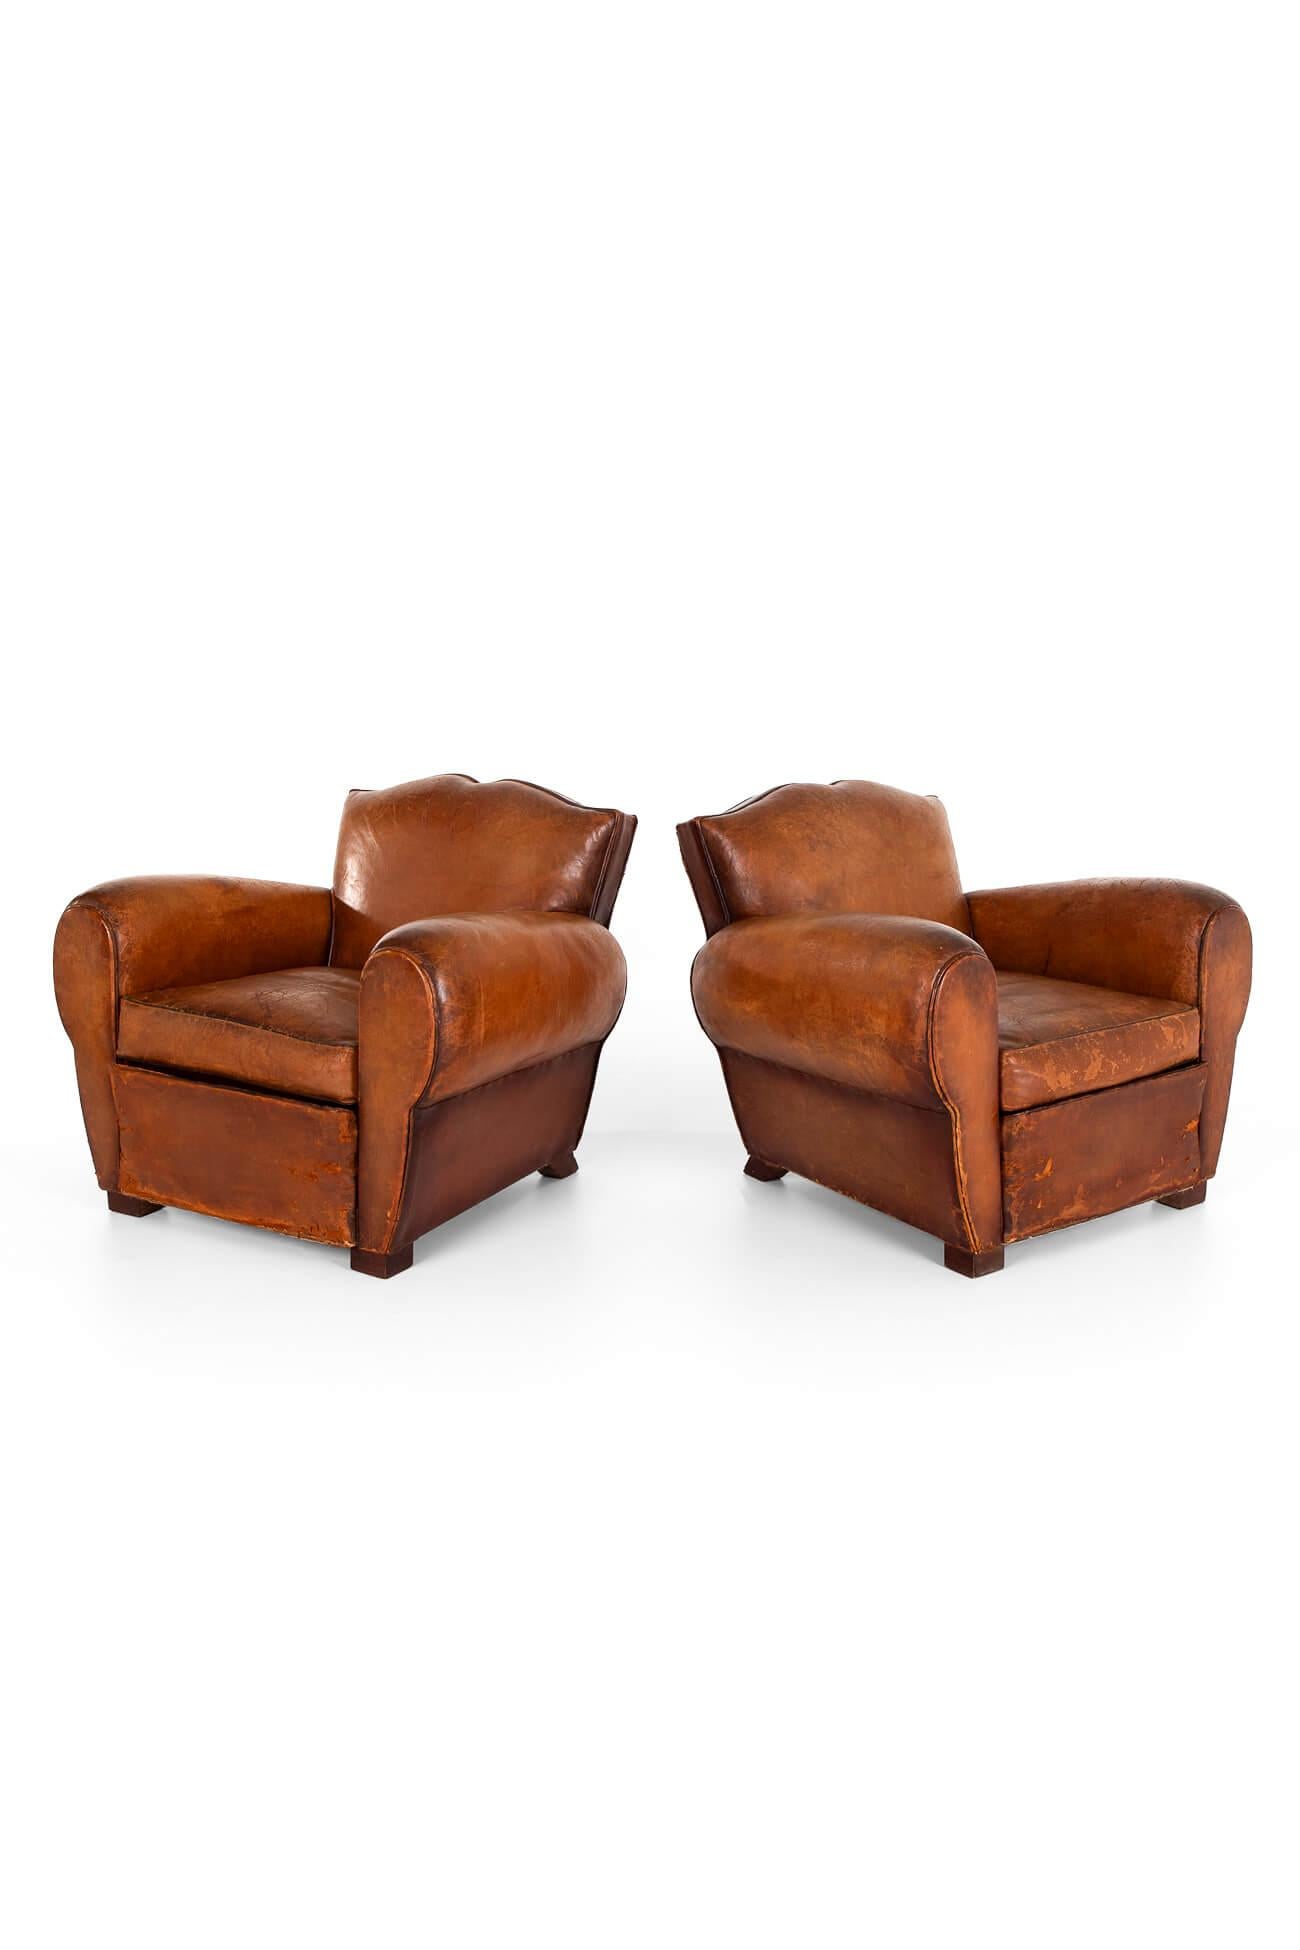 A wonderful pair of moustache back club chairs.

Generous cigar arms with deep seats over stuffed scroll backs.

Upholstered in a beautiful thick chestnut leather and raised on oak block feet.

Fully restored with new webbing and springs replaced